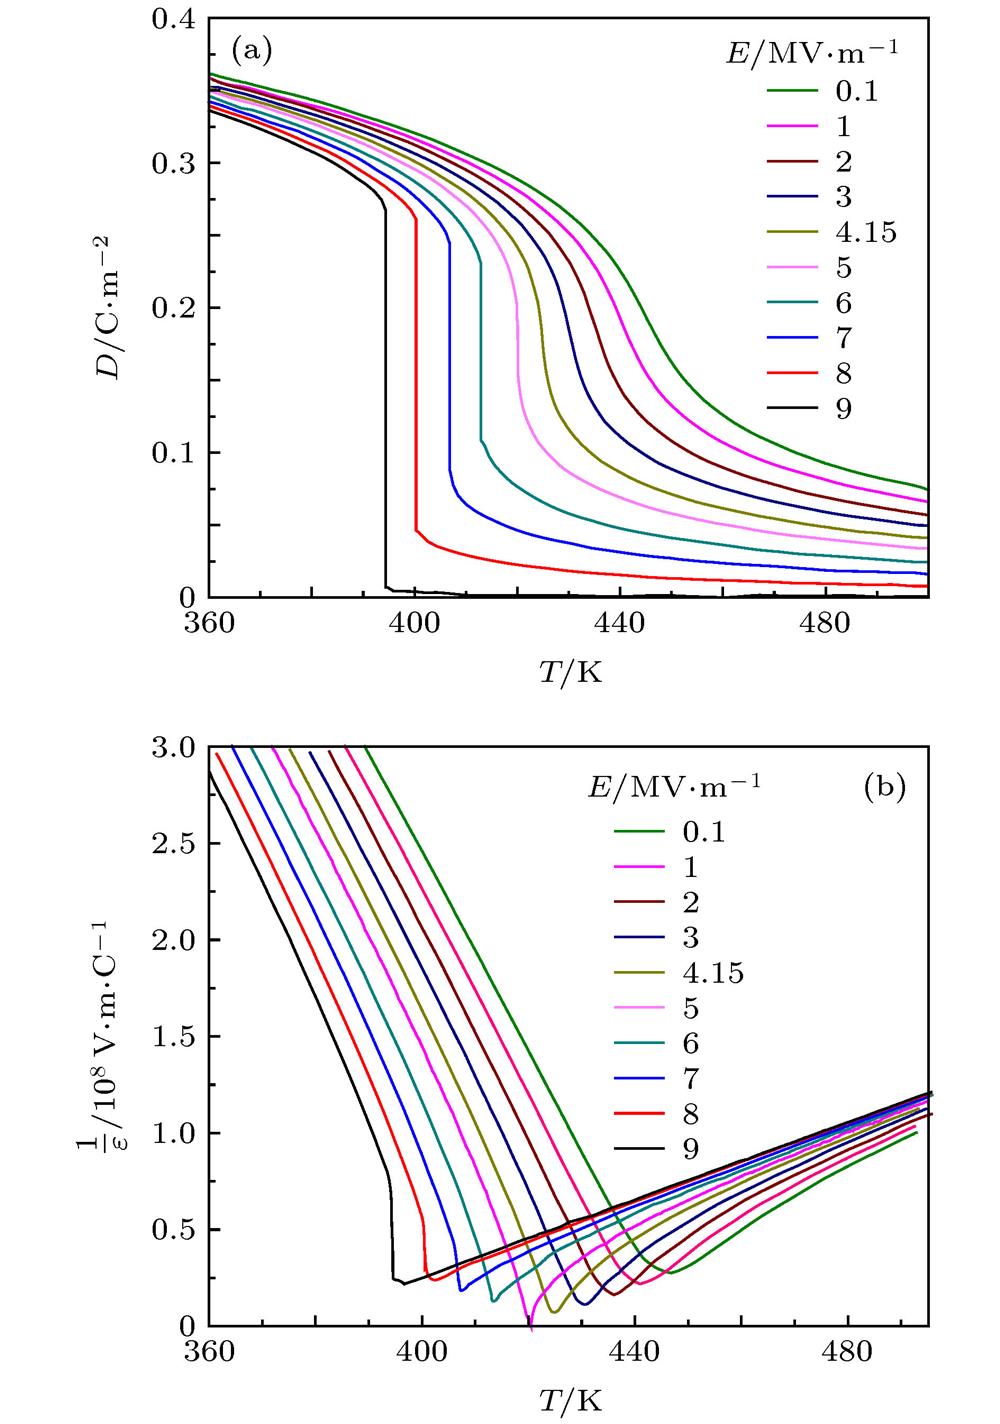 (a) Polarization and (b) reciprocal of permittivity of BaTiO3 as a function of temperature at various external electric fields.